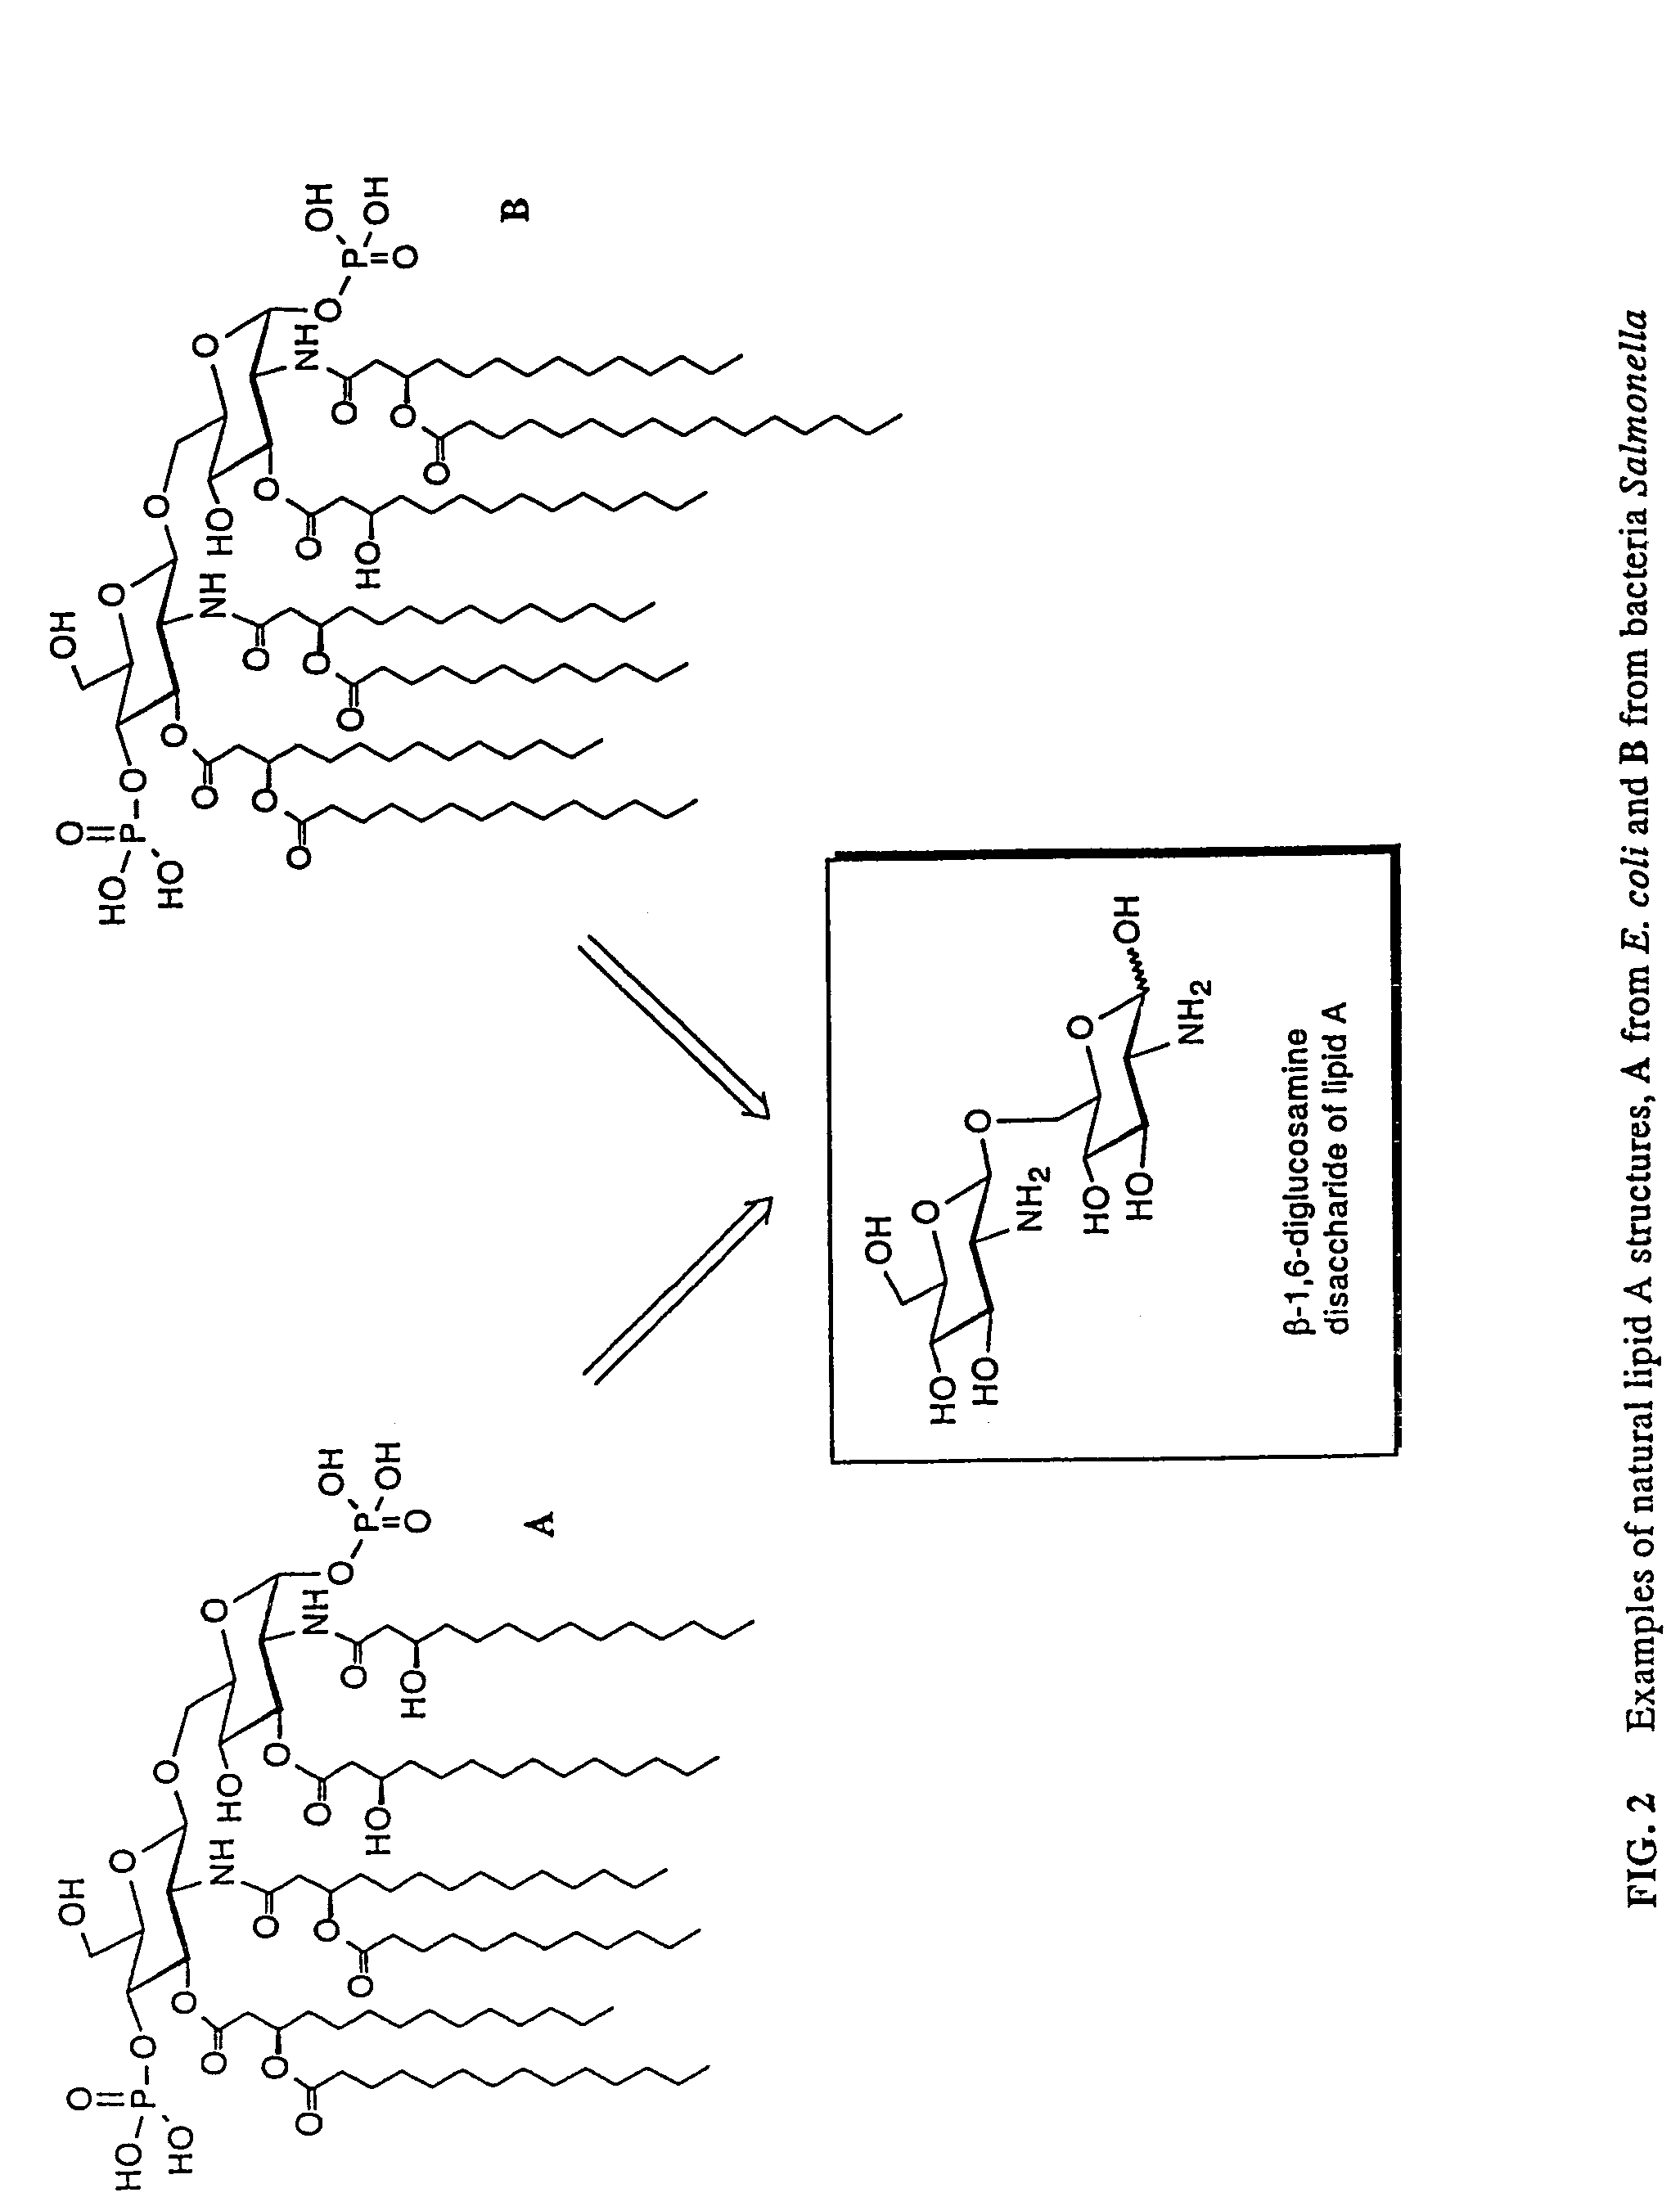 Lipid A and other carbohydrate ligand analogs